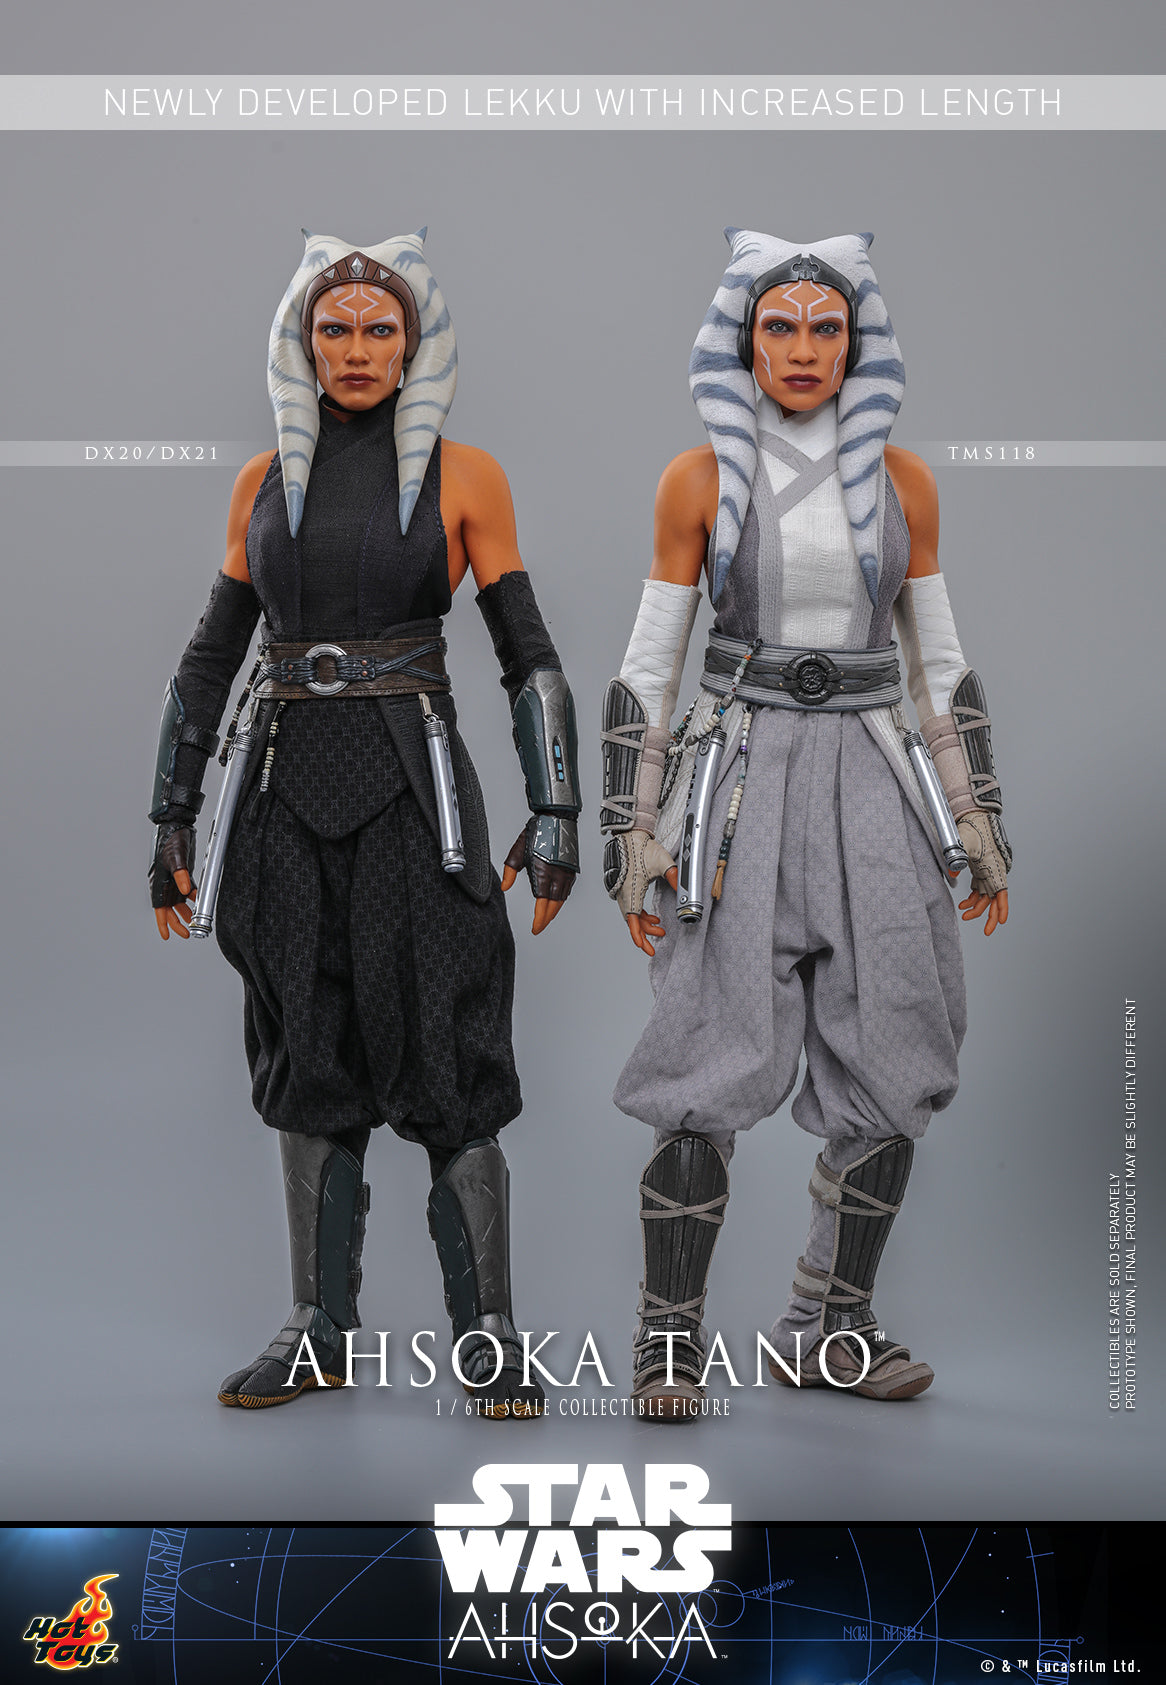 Hot Toys - Star Wars - Ahsoka Tano - 1/6th Scale Collectible Figure - (PRE-ORDER)